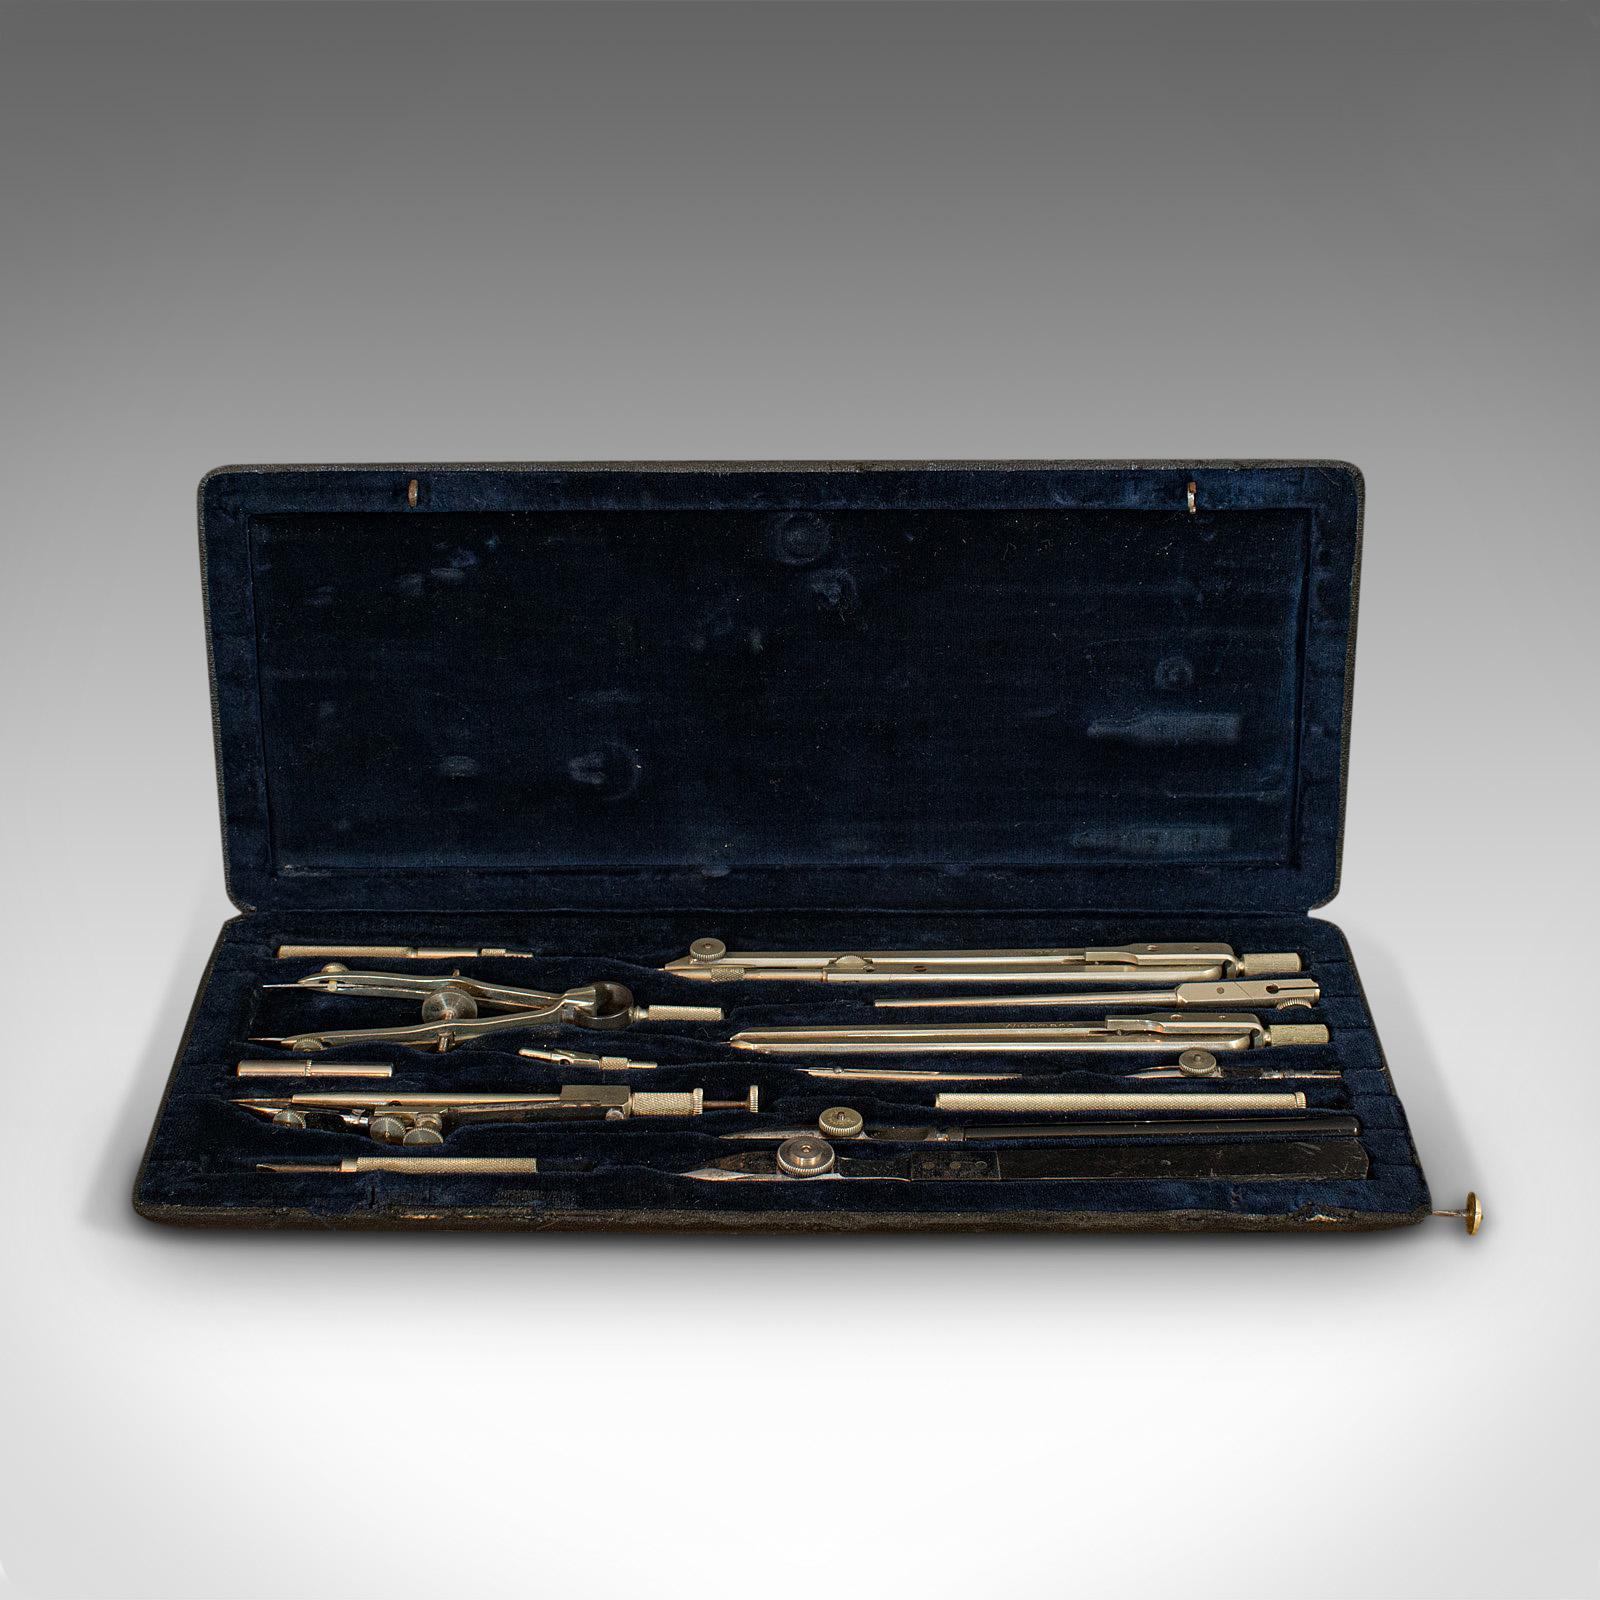 This is an antique technical drawing set. A German, architect's or cartographer's instrument case by Wichmann, dating to the early 20th century, circa 1920.

Quality, 14-piece instrument set
Displays a desirable aged patina
Silver nickel tools